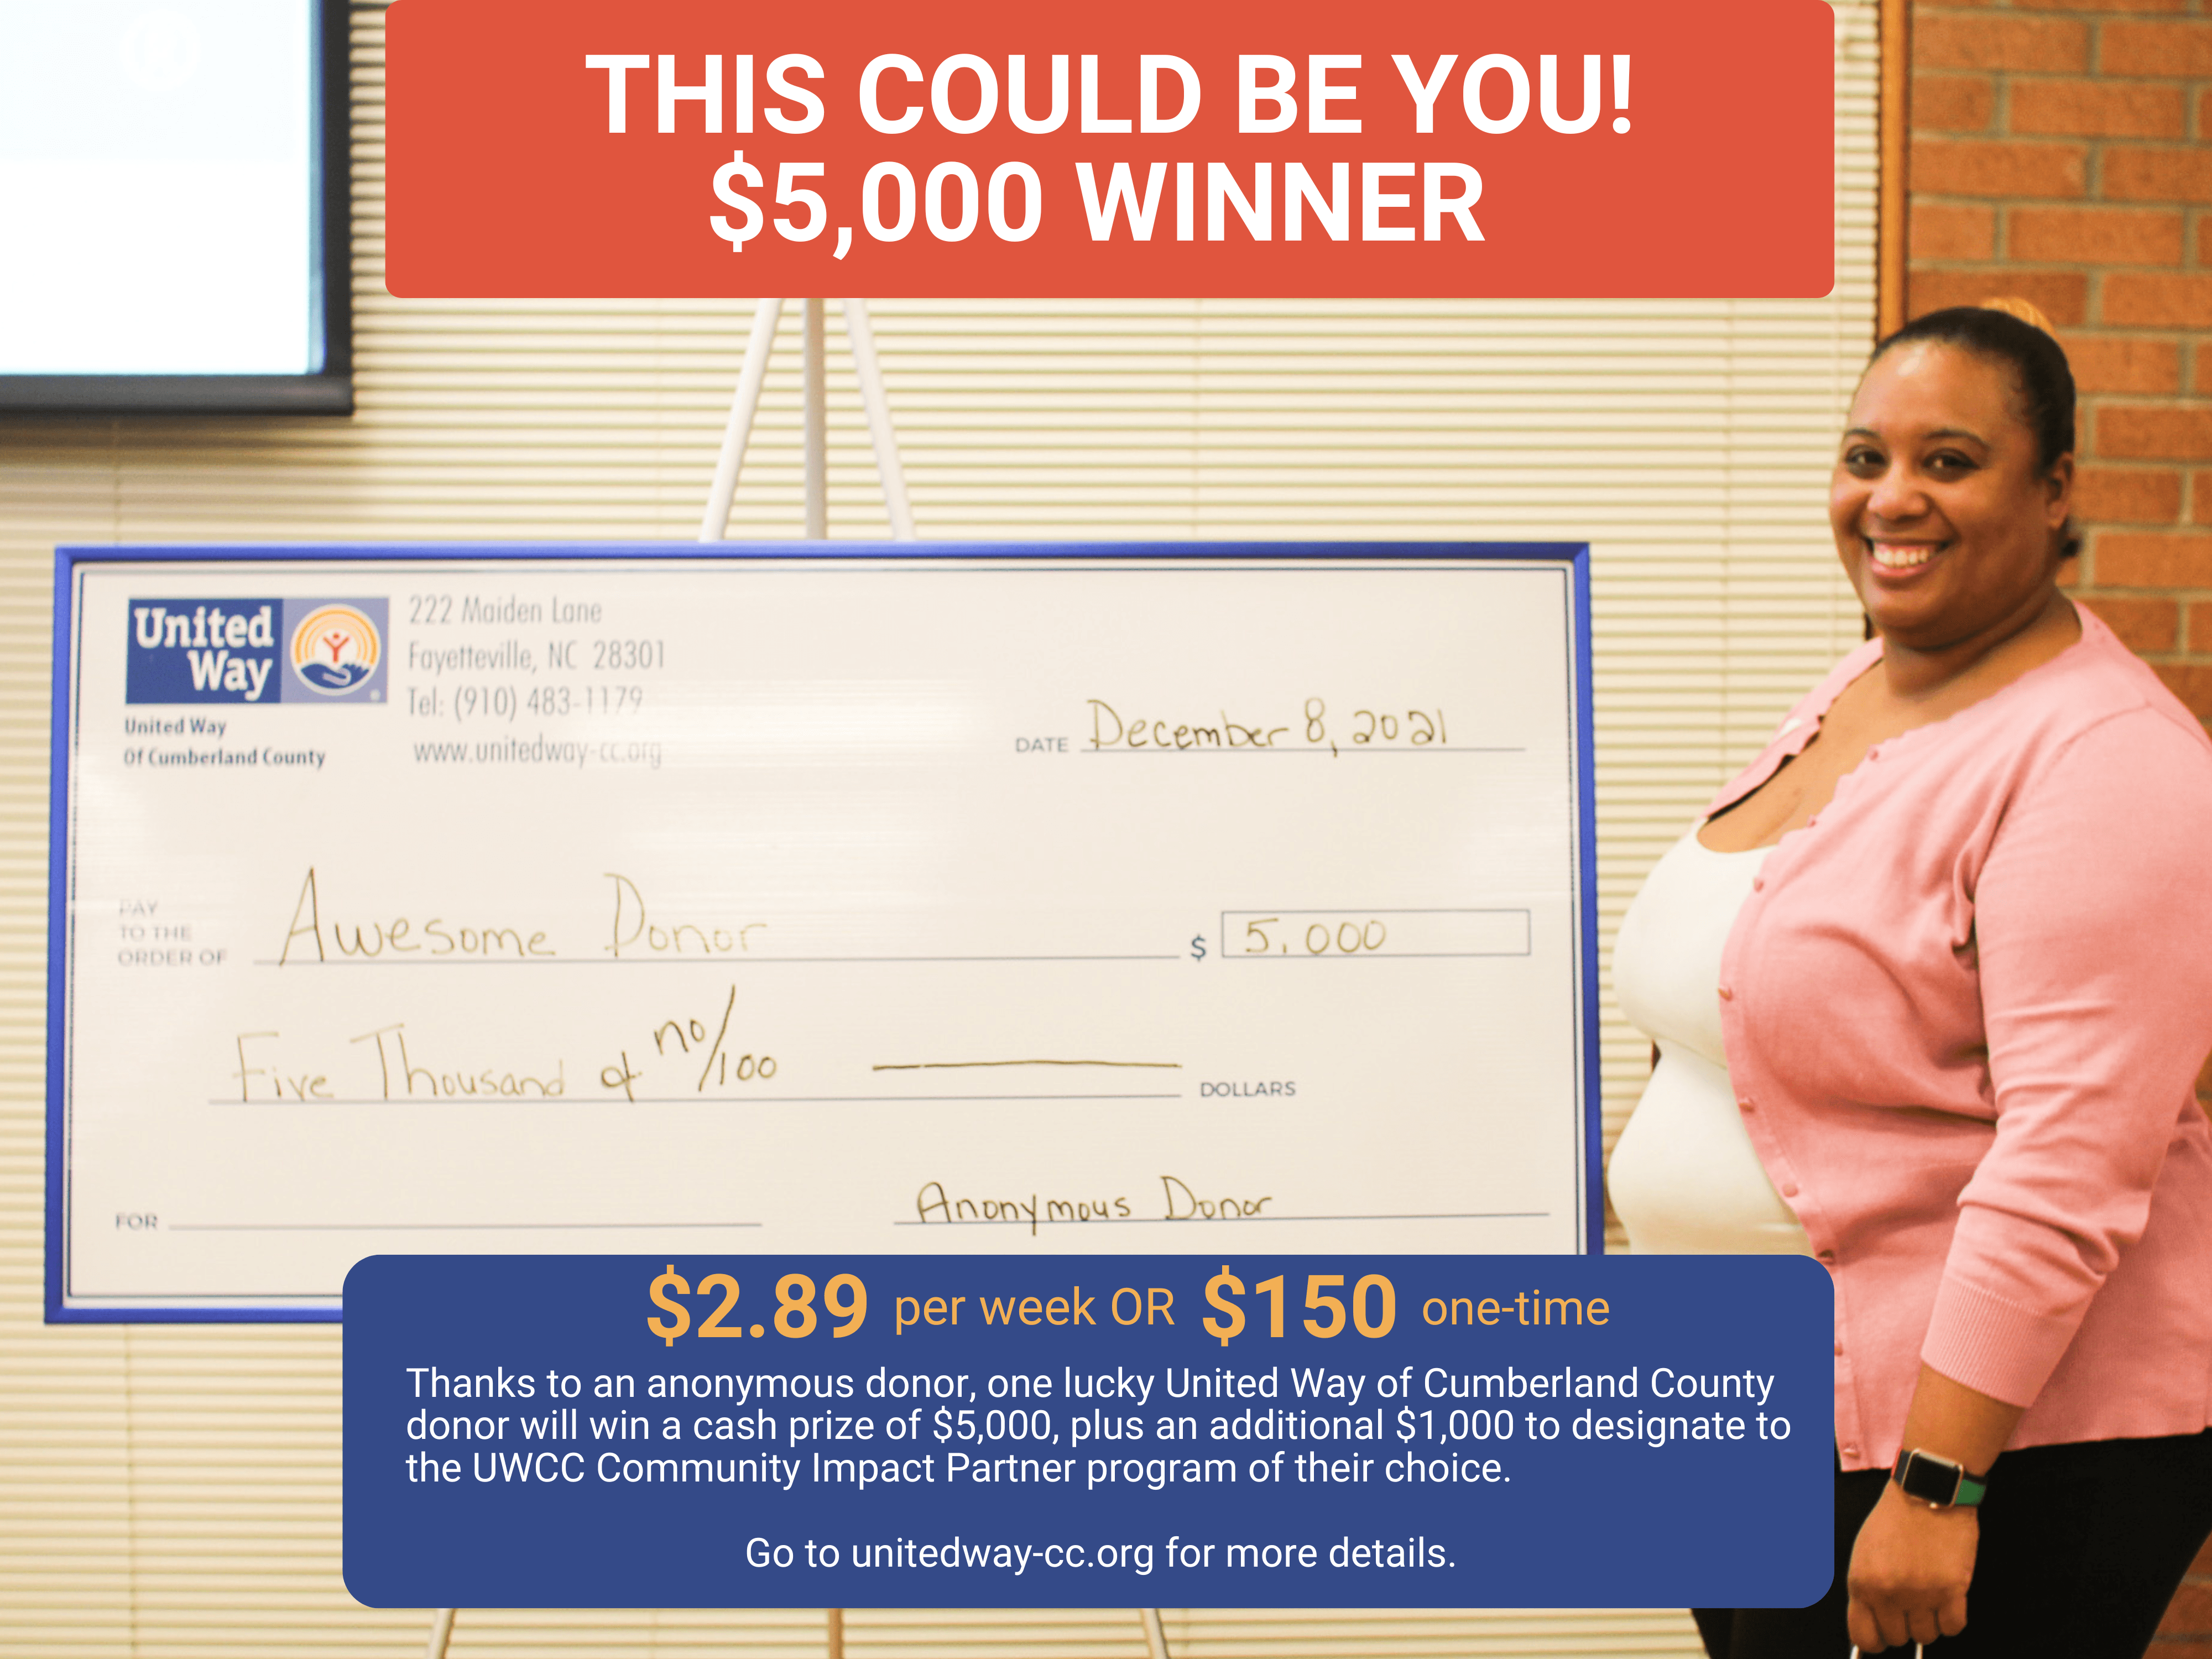 You could be a $5,000 Winner!